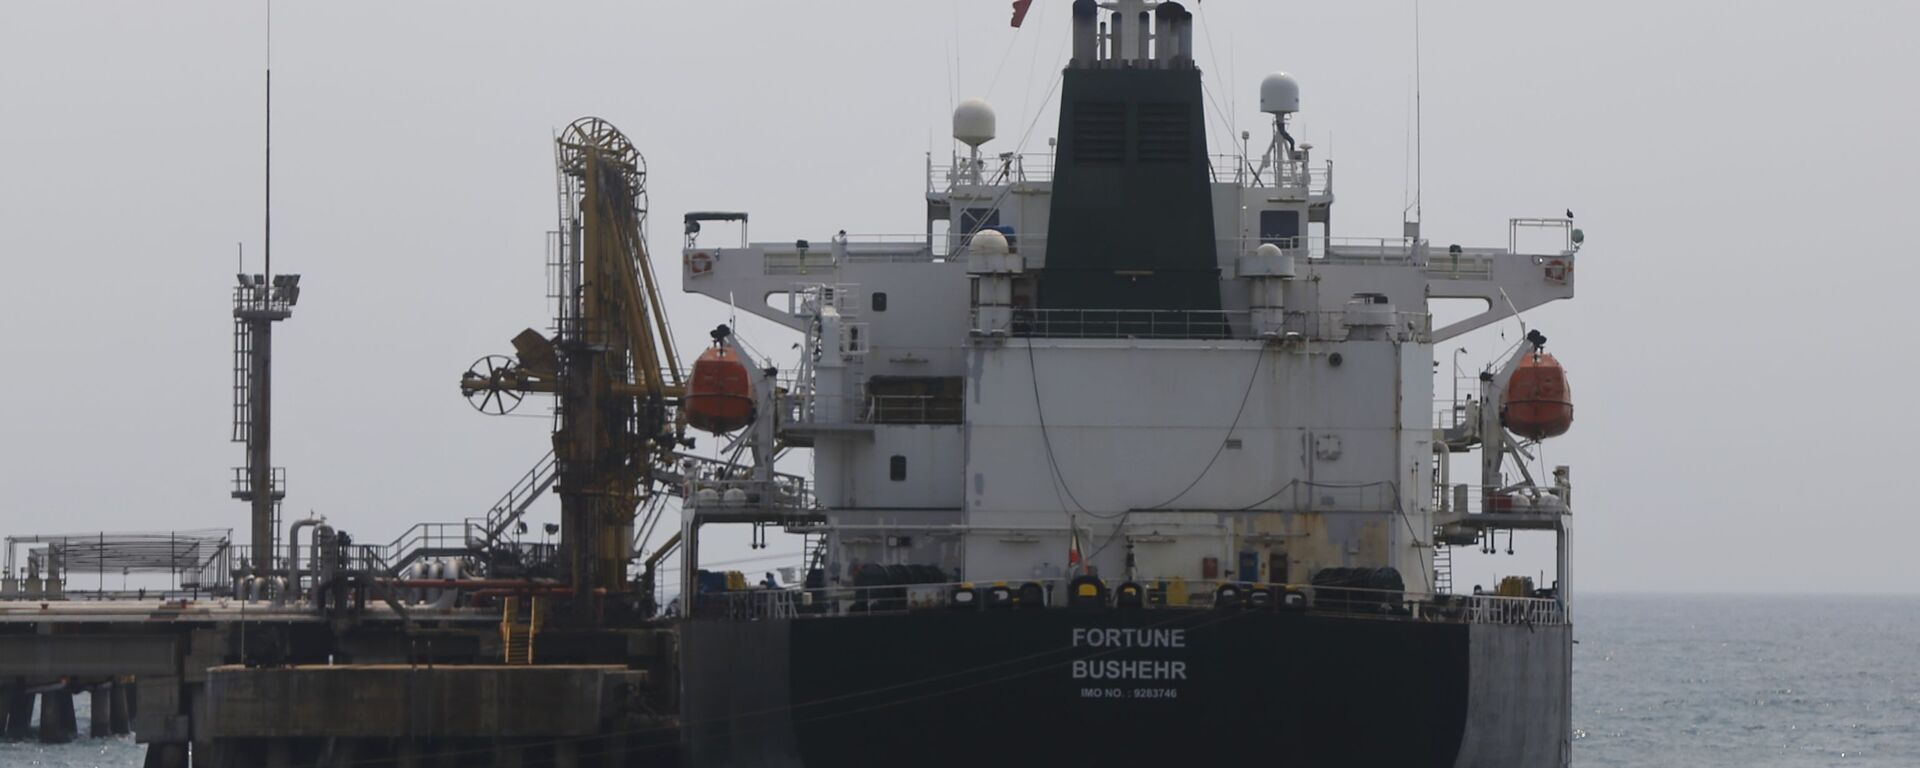 Iranian oil tanker Fortune is anchored at the dock of the El Palito refinery near Puerto Cabello, Venezuela, Monday, May 25, 2020 - Sputnik International, 1920, 25.09.2021